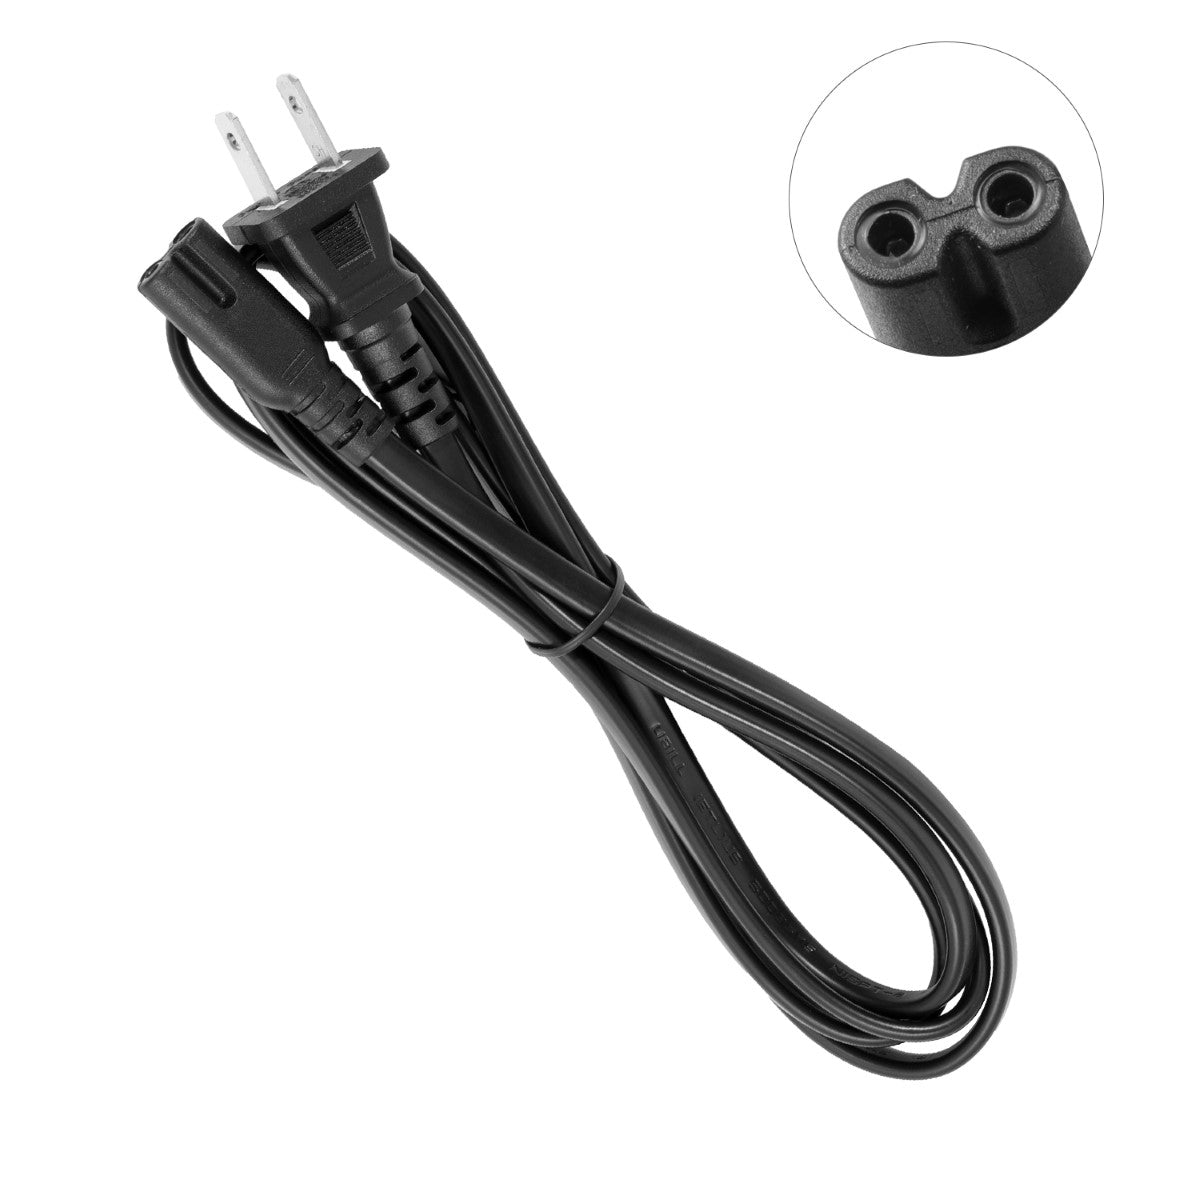 ENVY D411 e-All-in-One Printer Power Cord